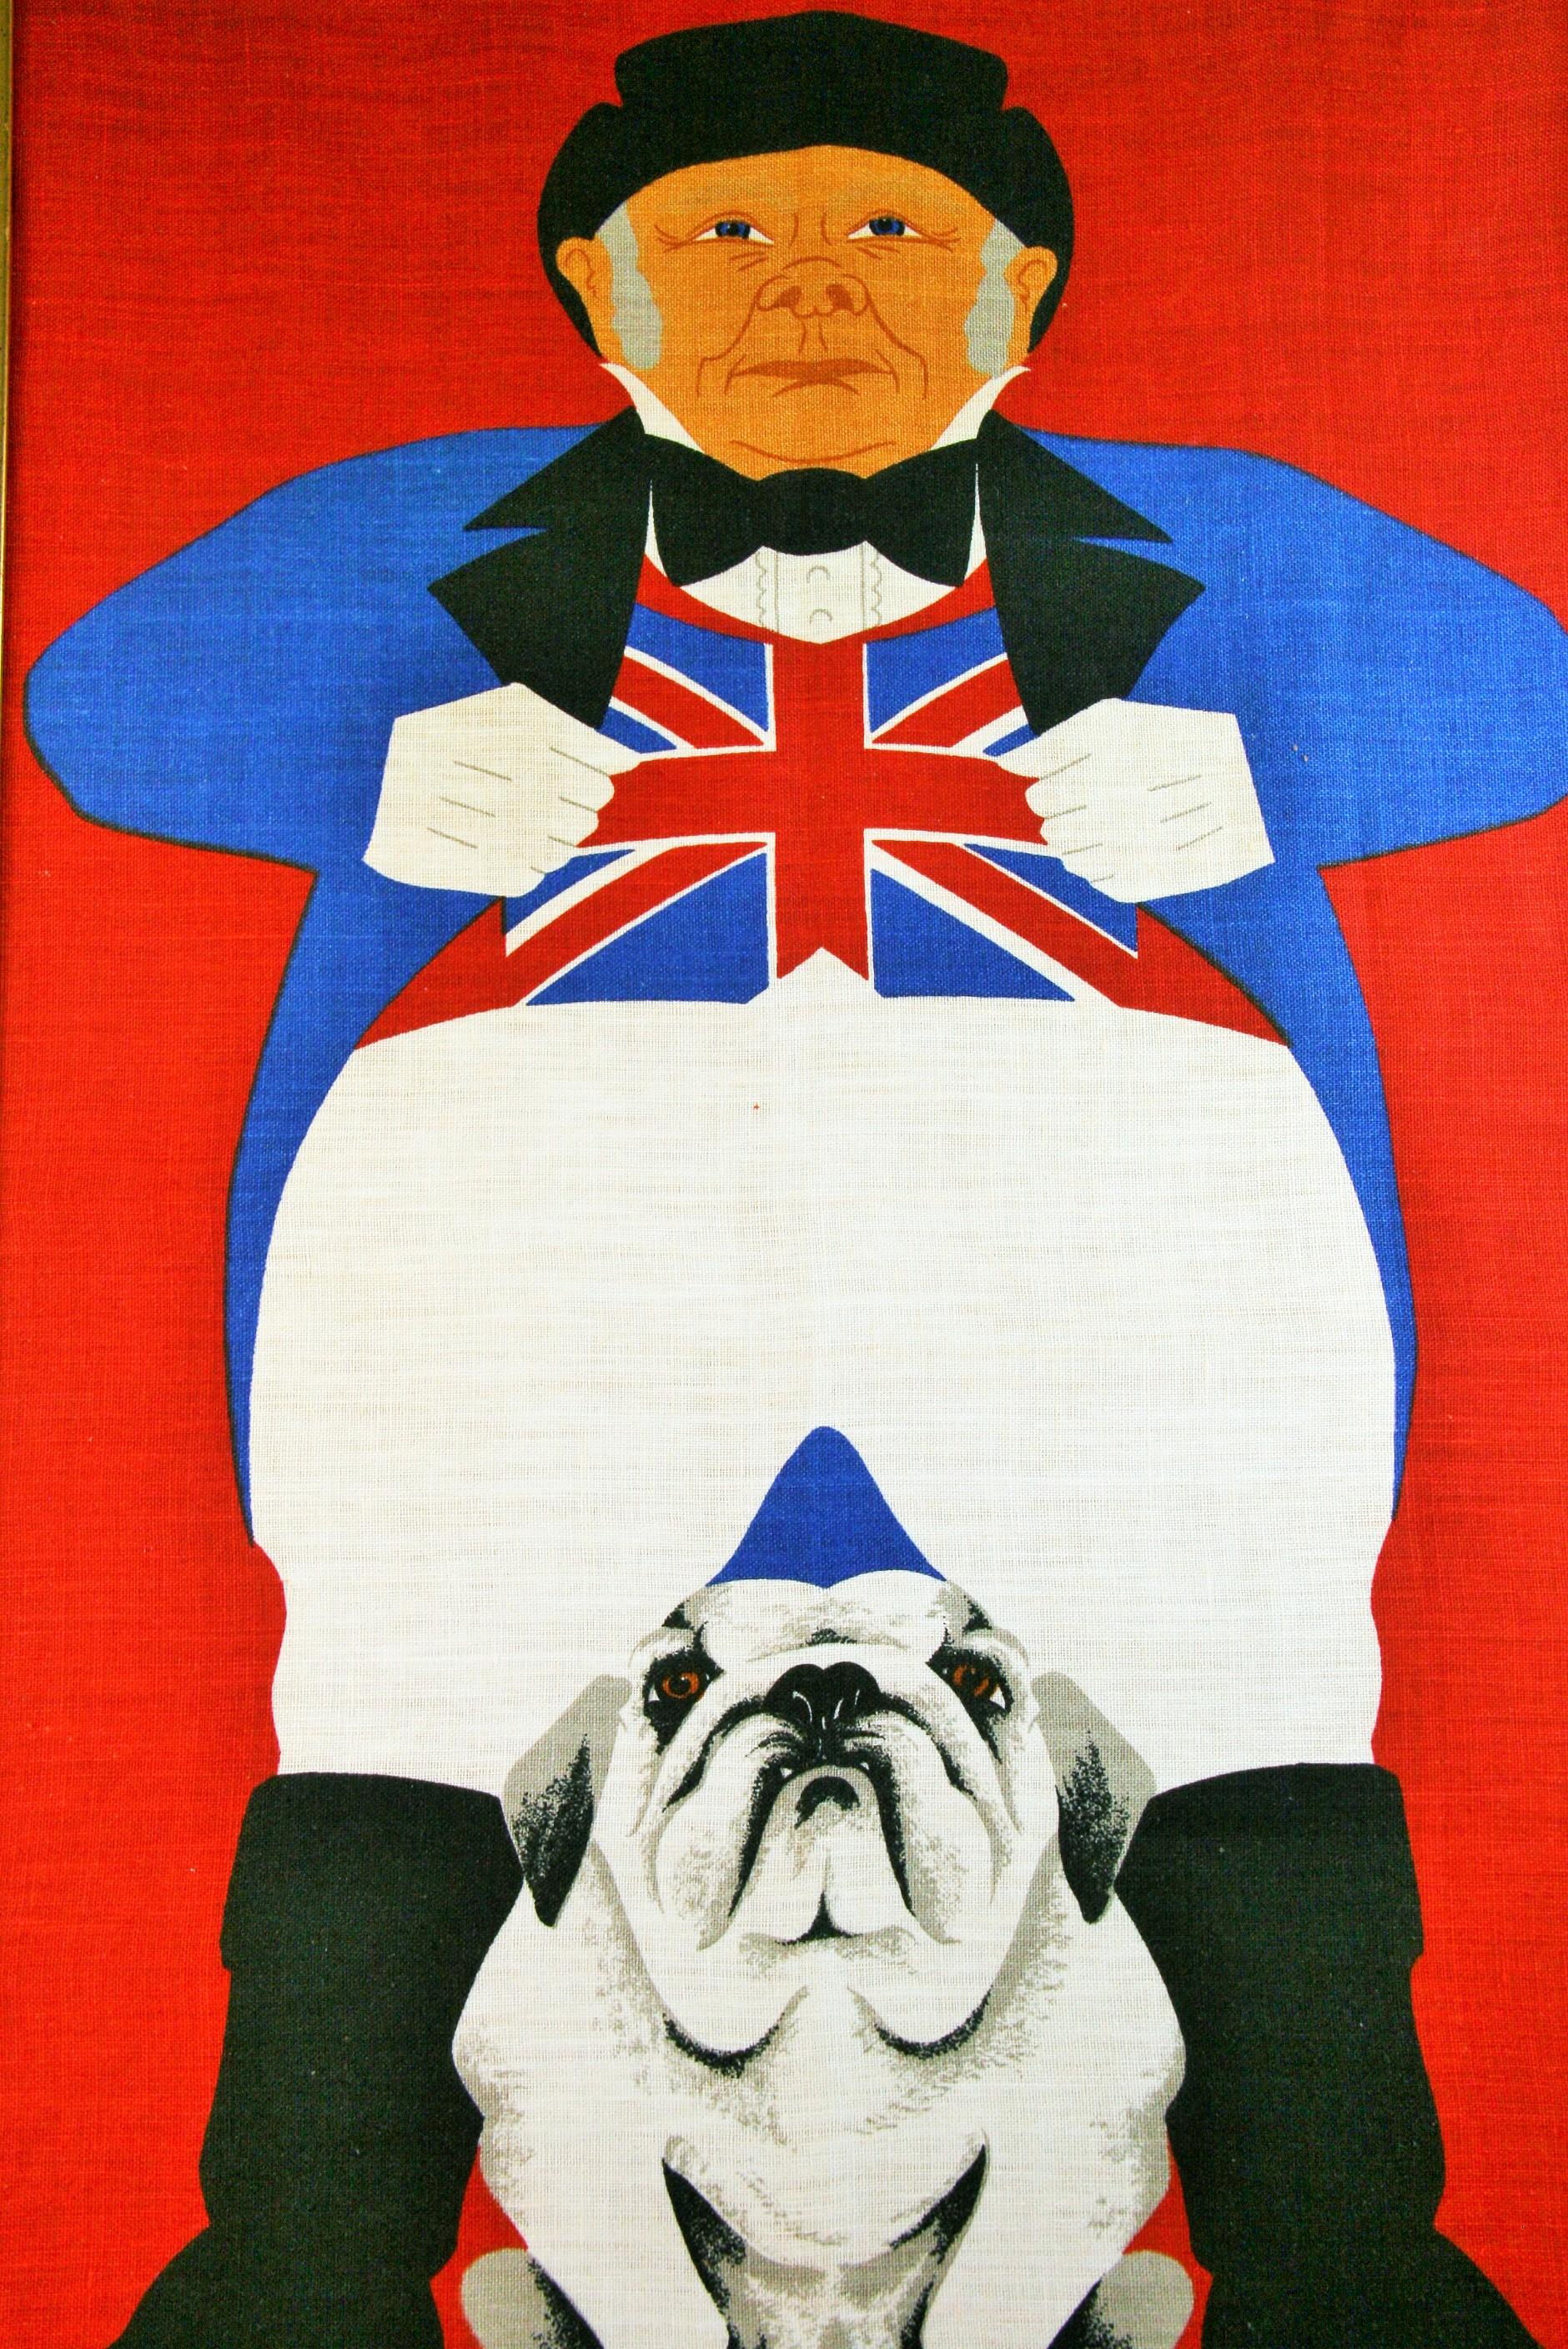 Englishman Figurative and His Bulldog Animal  - Painting by Ulster